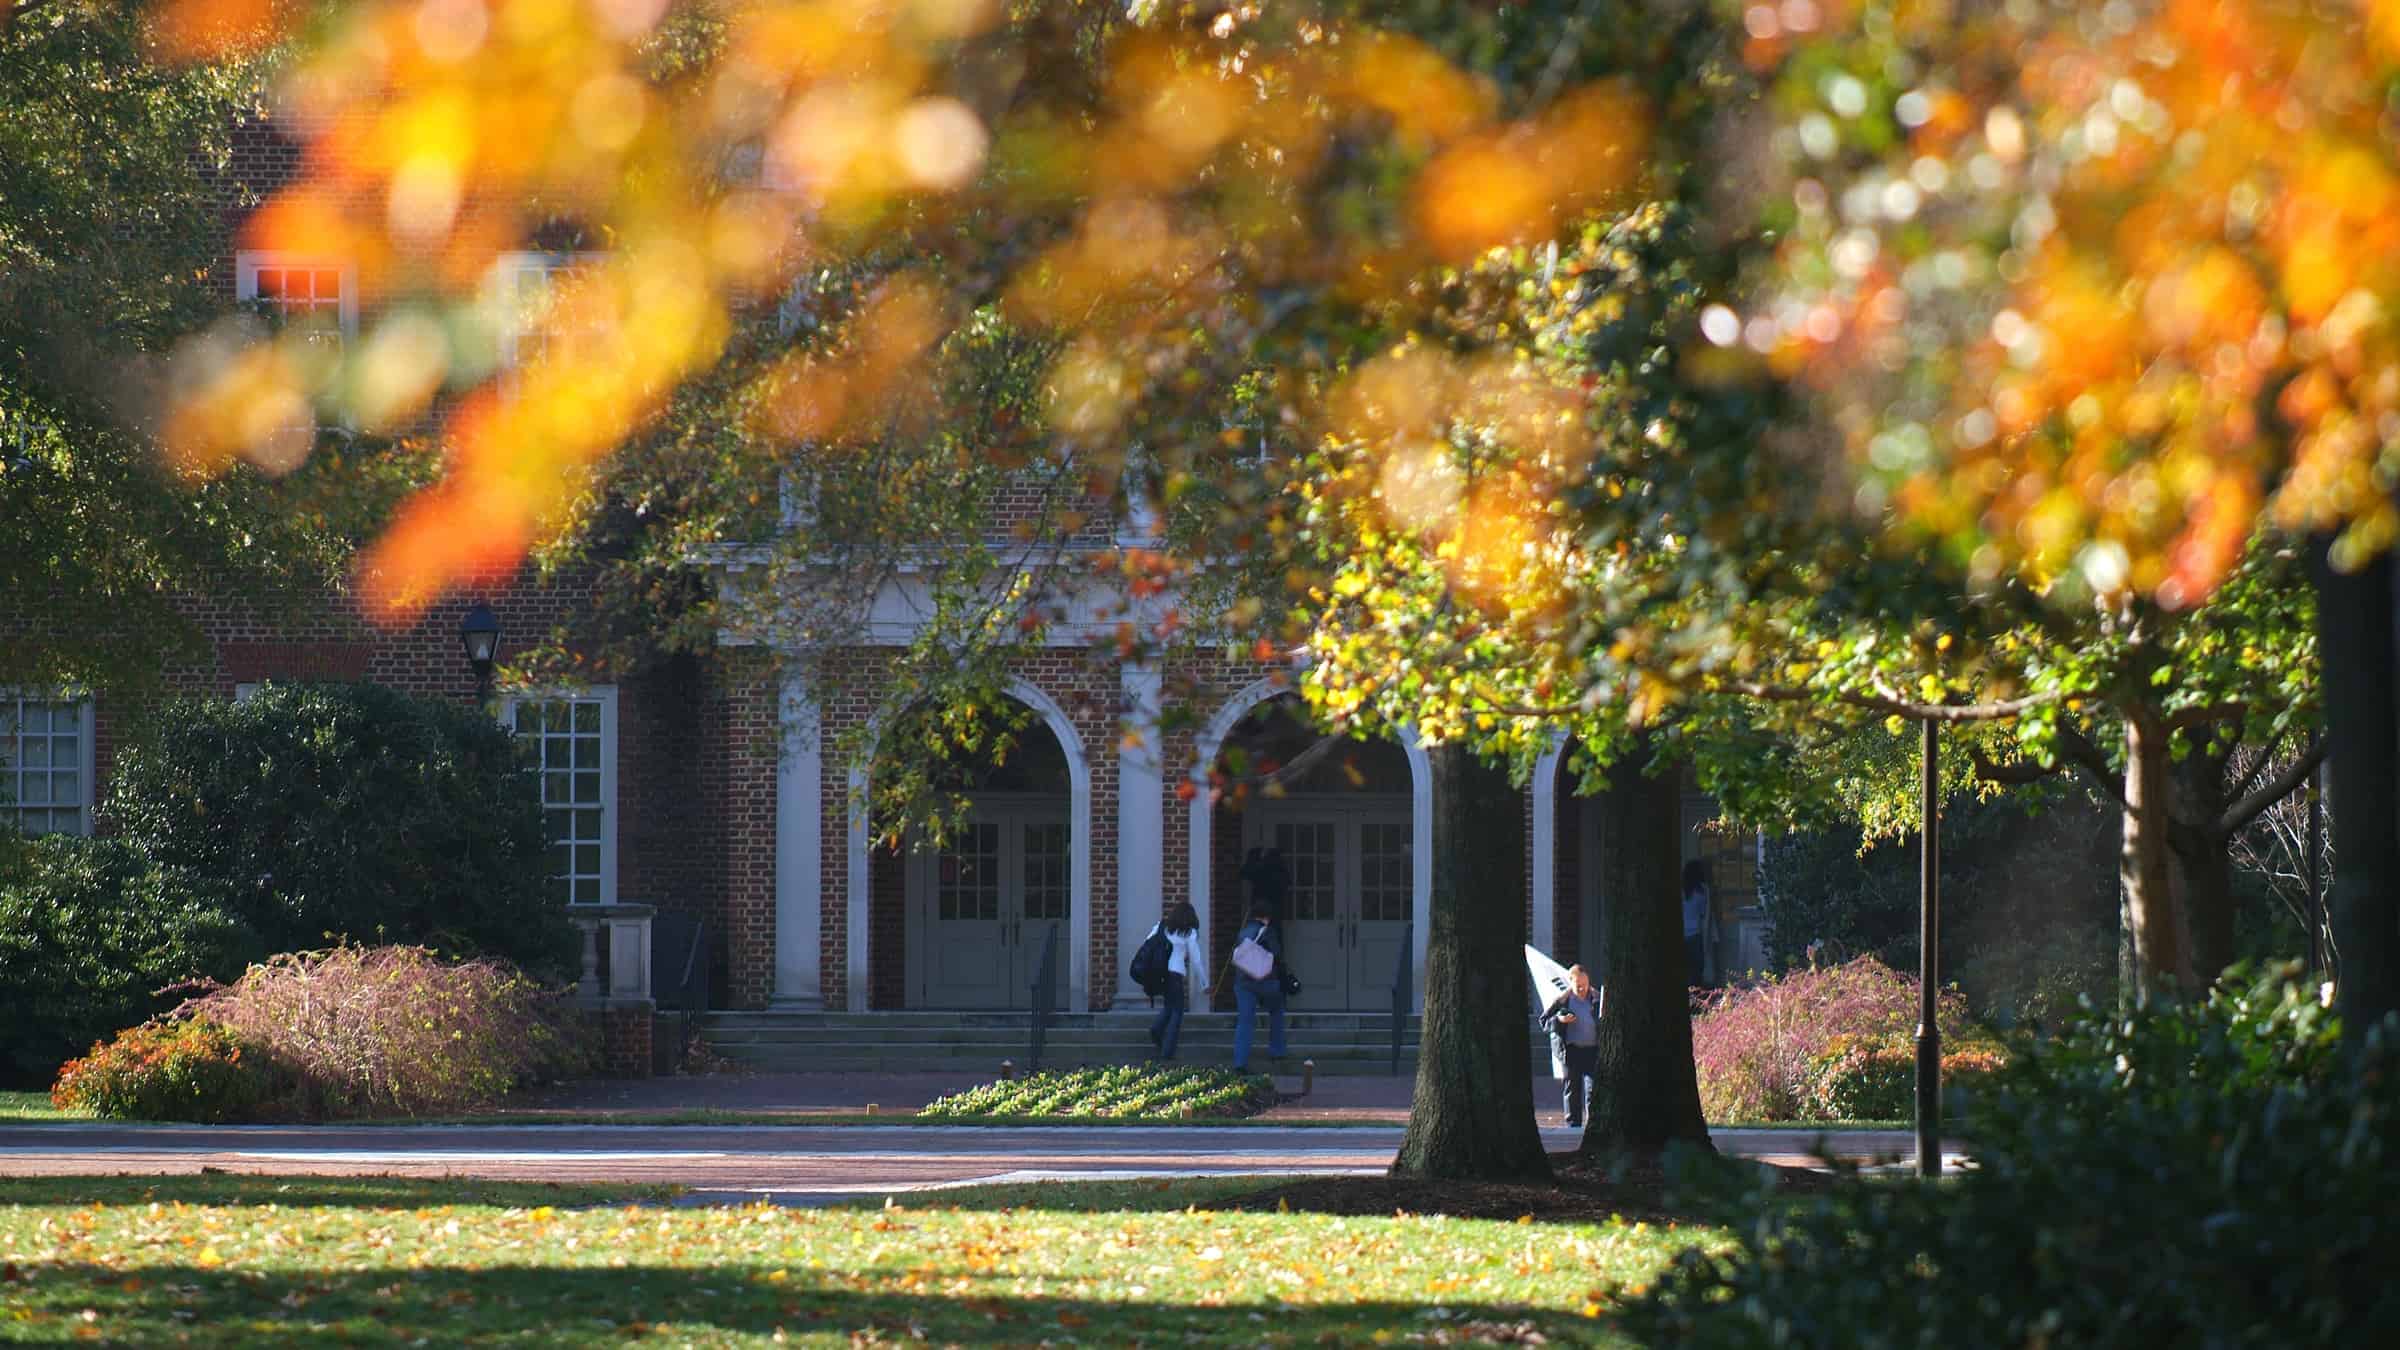 students entering Robertson Hall, which houses Regent's law school in Virginia.